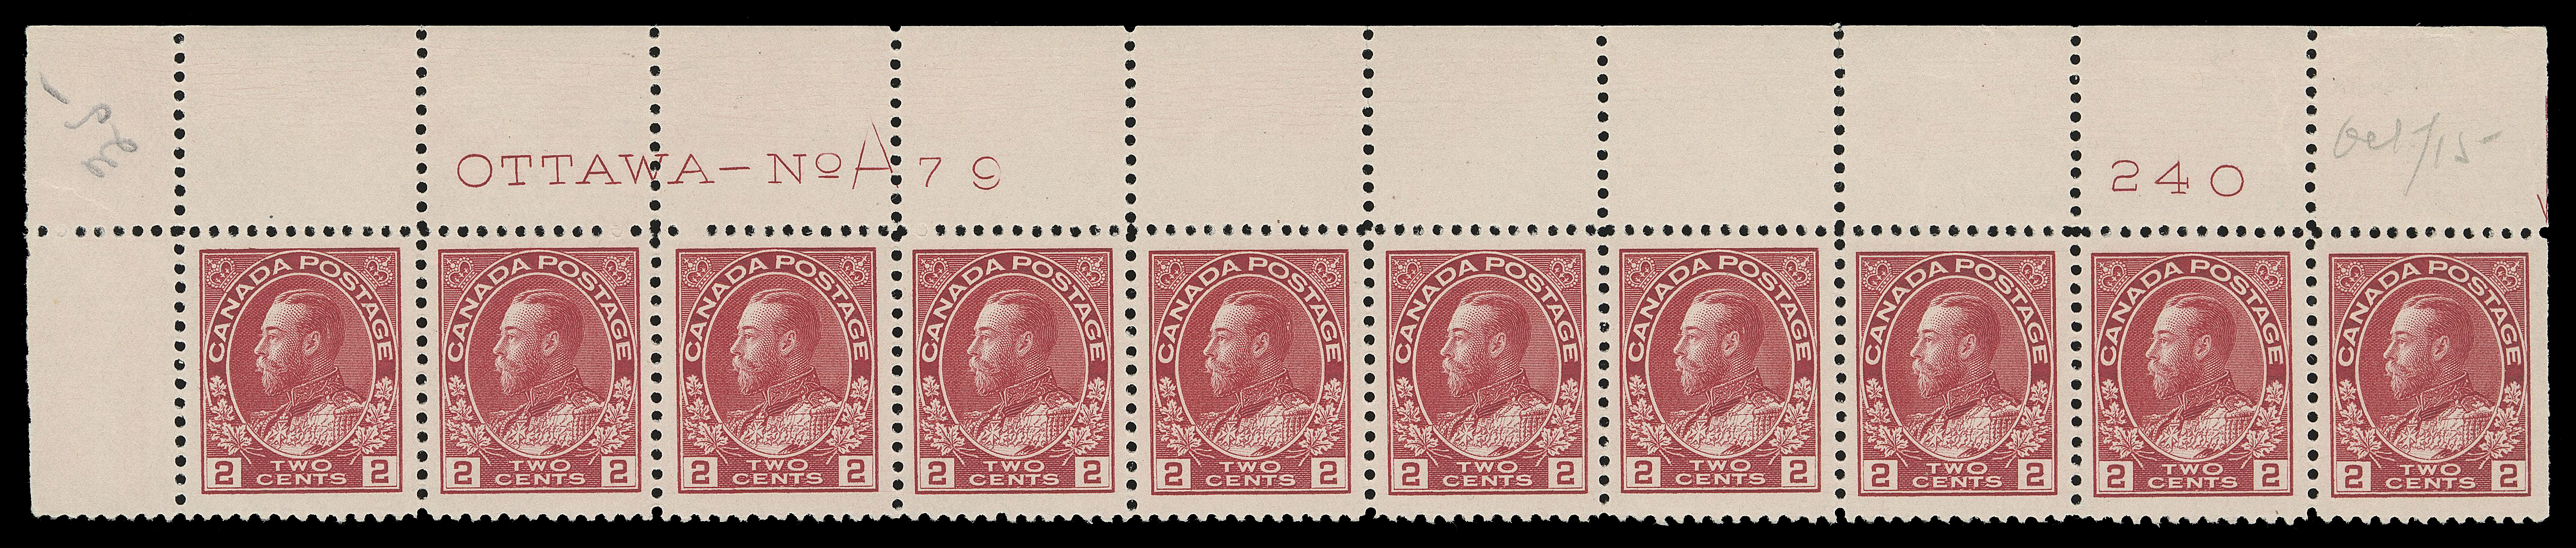 ADMIRAL STAMPS  106,A superbly centered upper left Plate 79 strip of ten, unusually large margined with bright colour, LH in selvedge only, stamps VF+ NH (Unitrade cat. $1,200+)